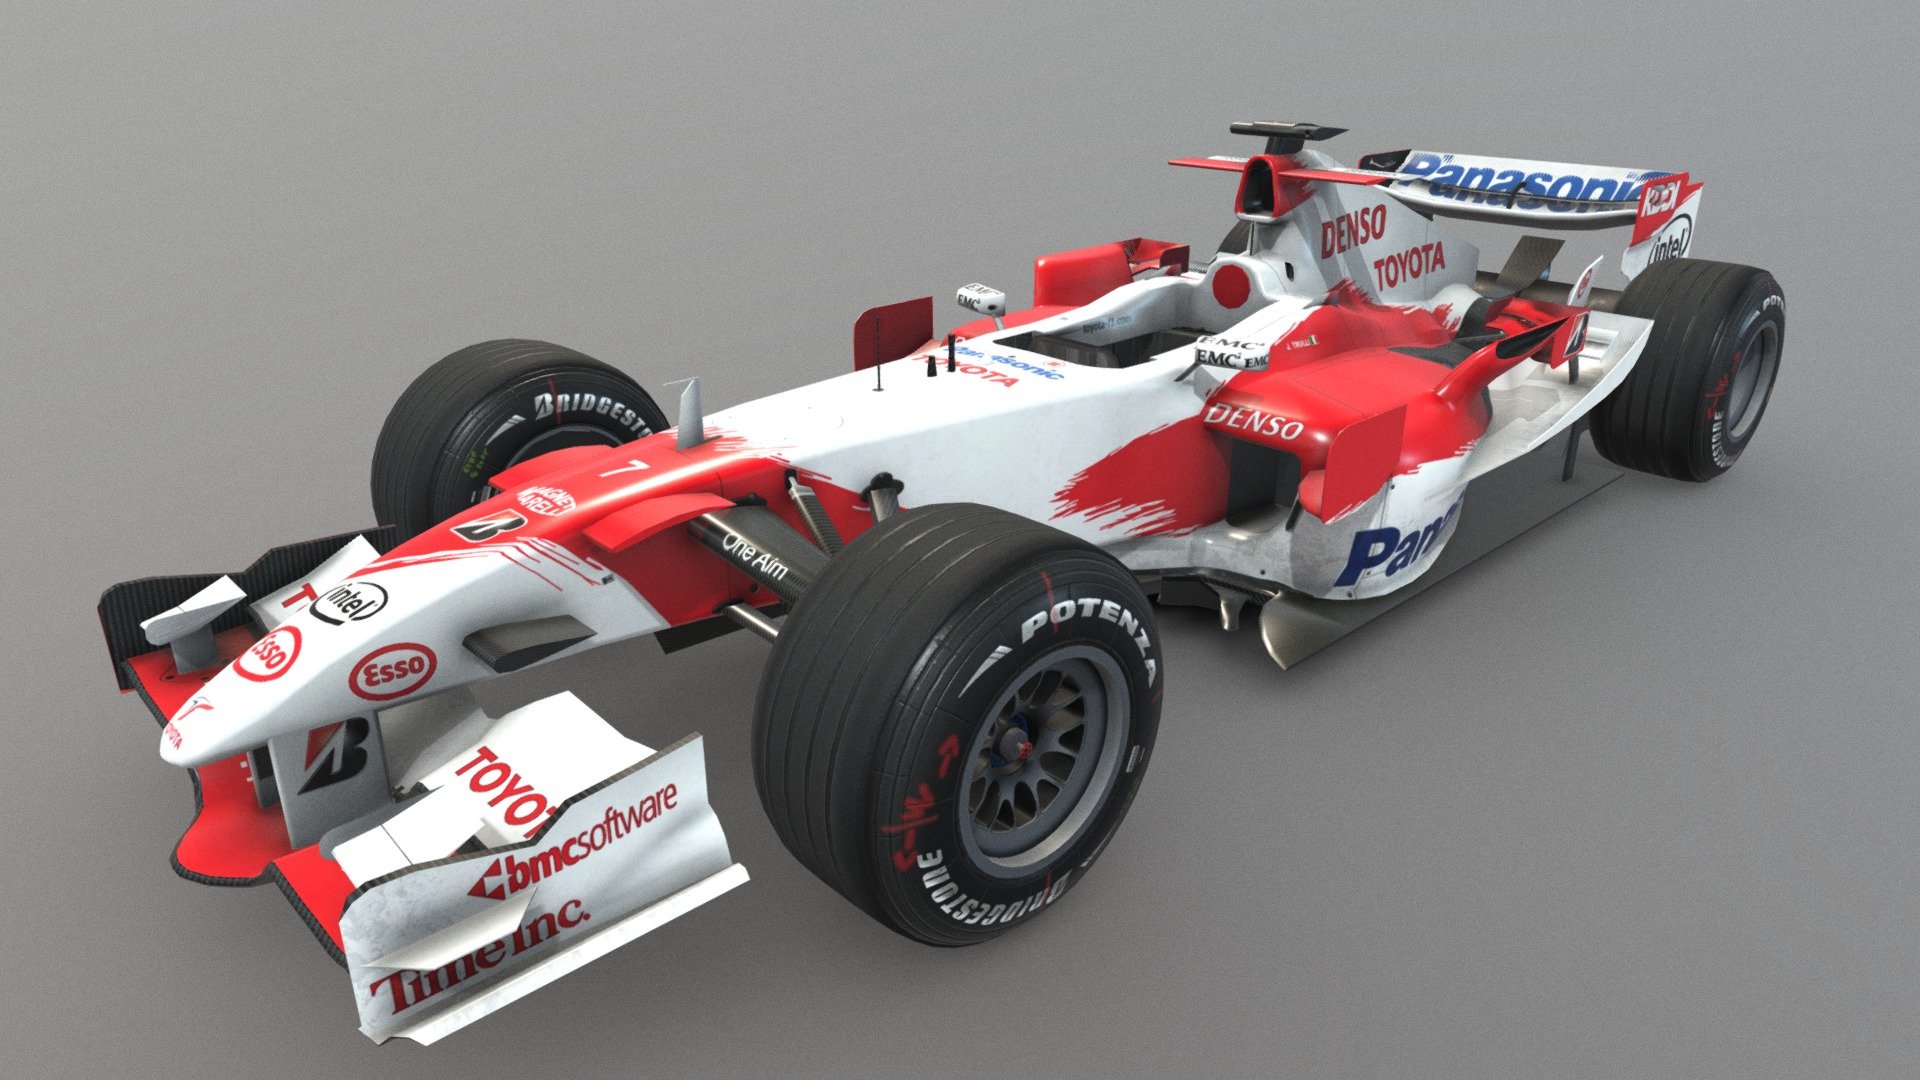 Toyota F1 car from 2006 as included in the F1 2006 mod by CTDP.

Textures: Dahie - Toyota TF106 (2006) - 3D model by Cars & Tracks Development Project (@ctdp) 3d model